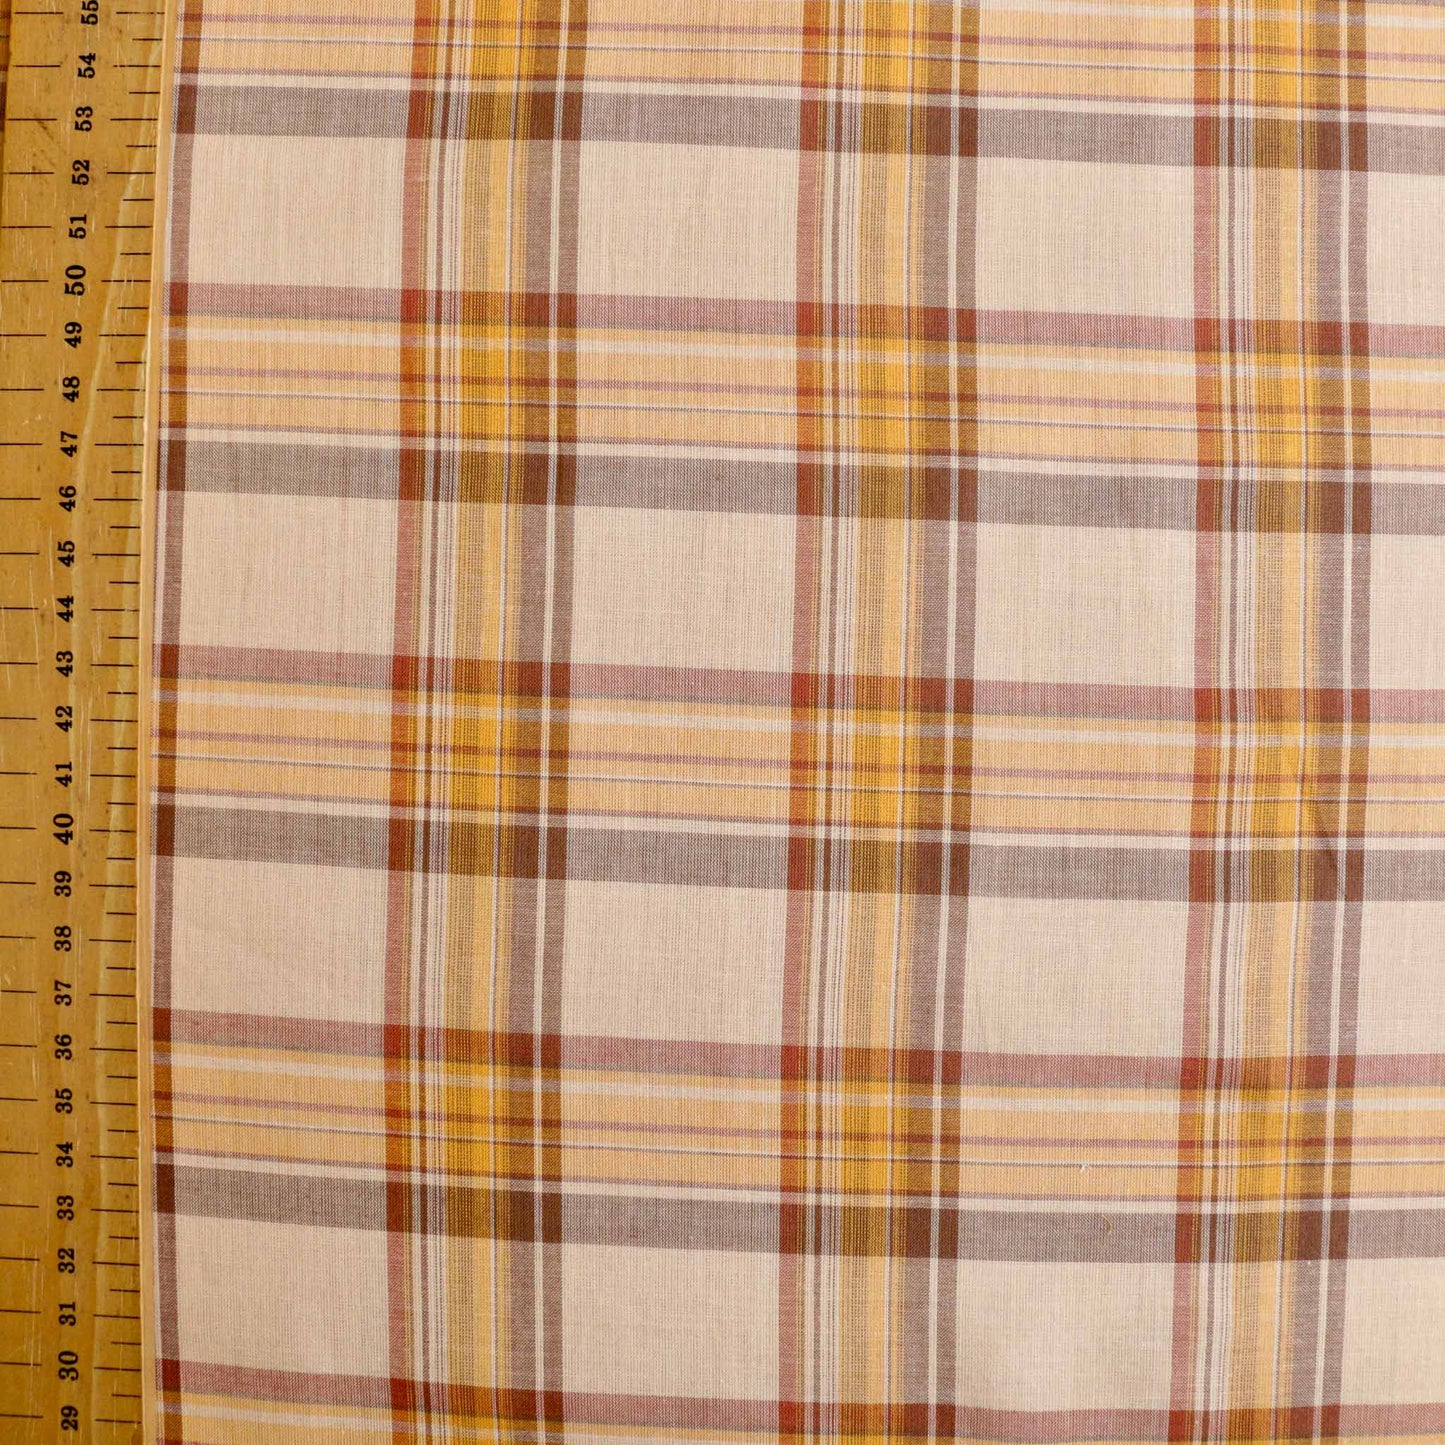 metre cotton dressmaking fabric in pale beige with brown check pattern